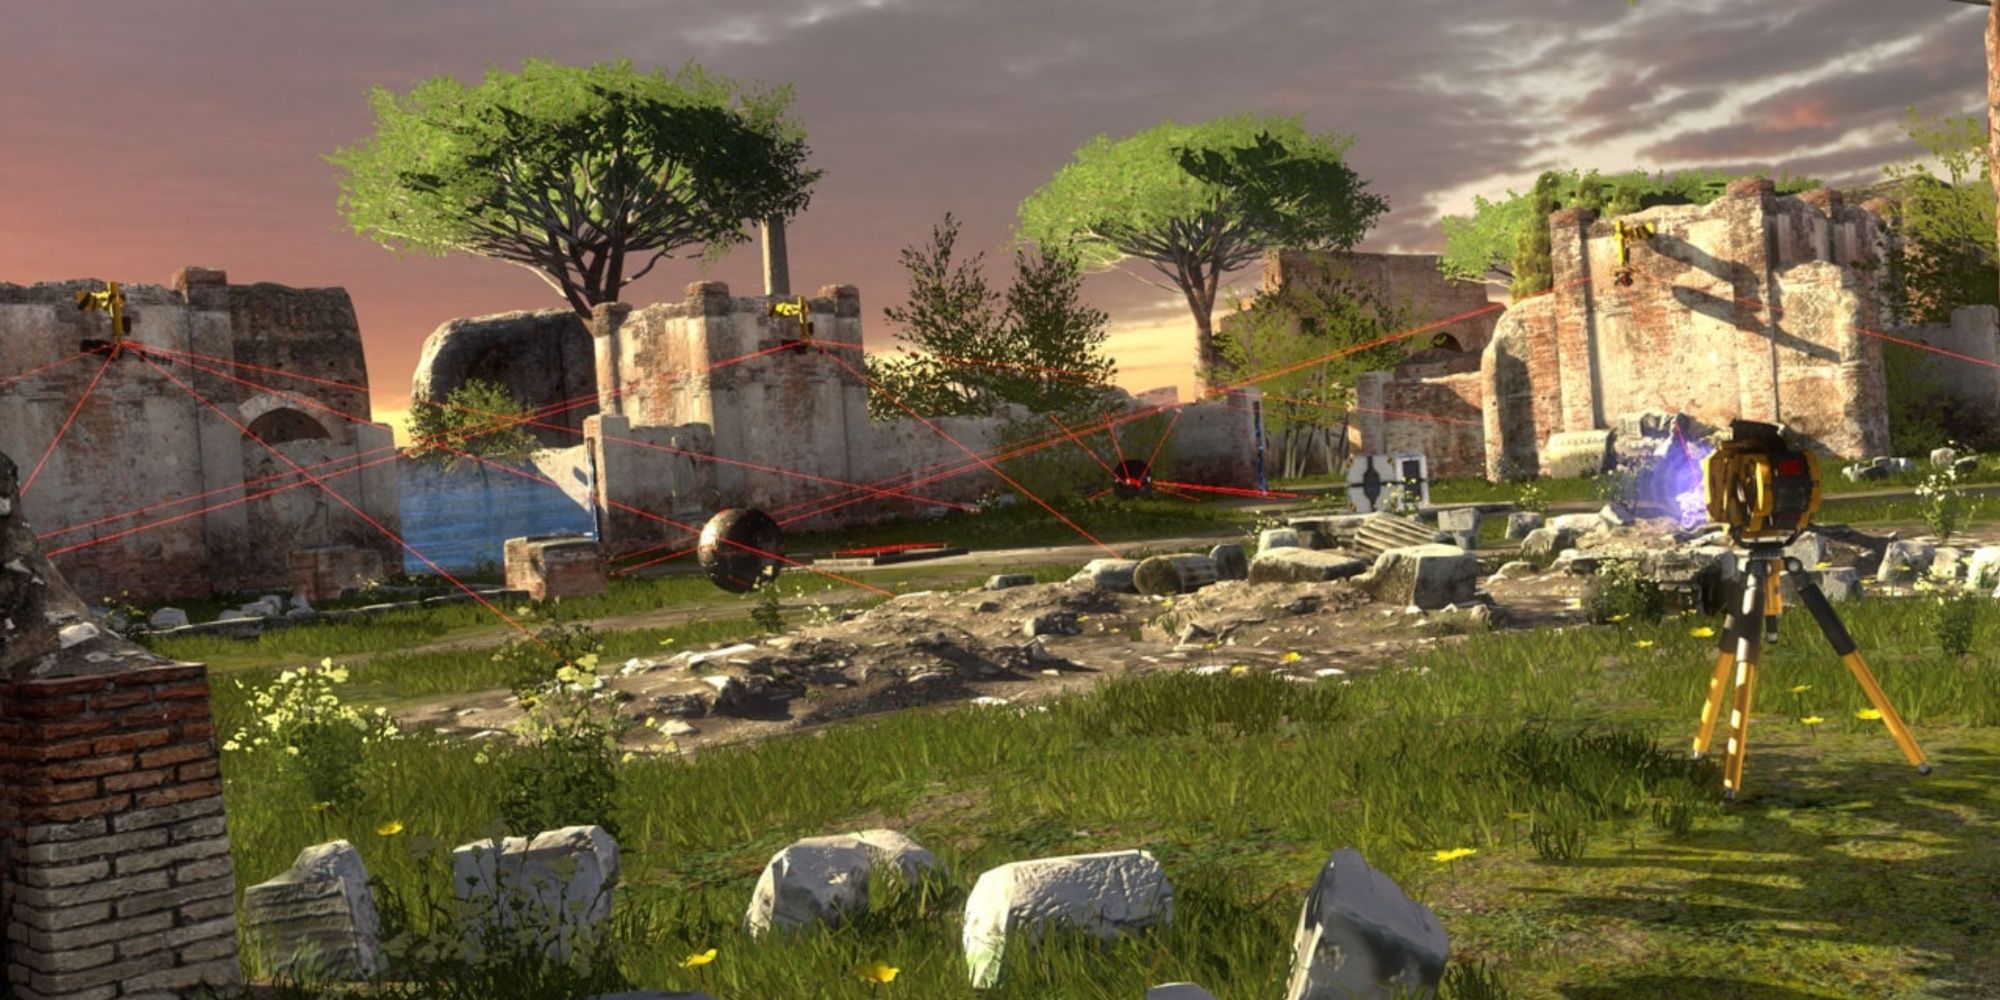 Laser puzzle in an open field surrounded by crumbled ruins the talos principle